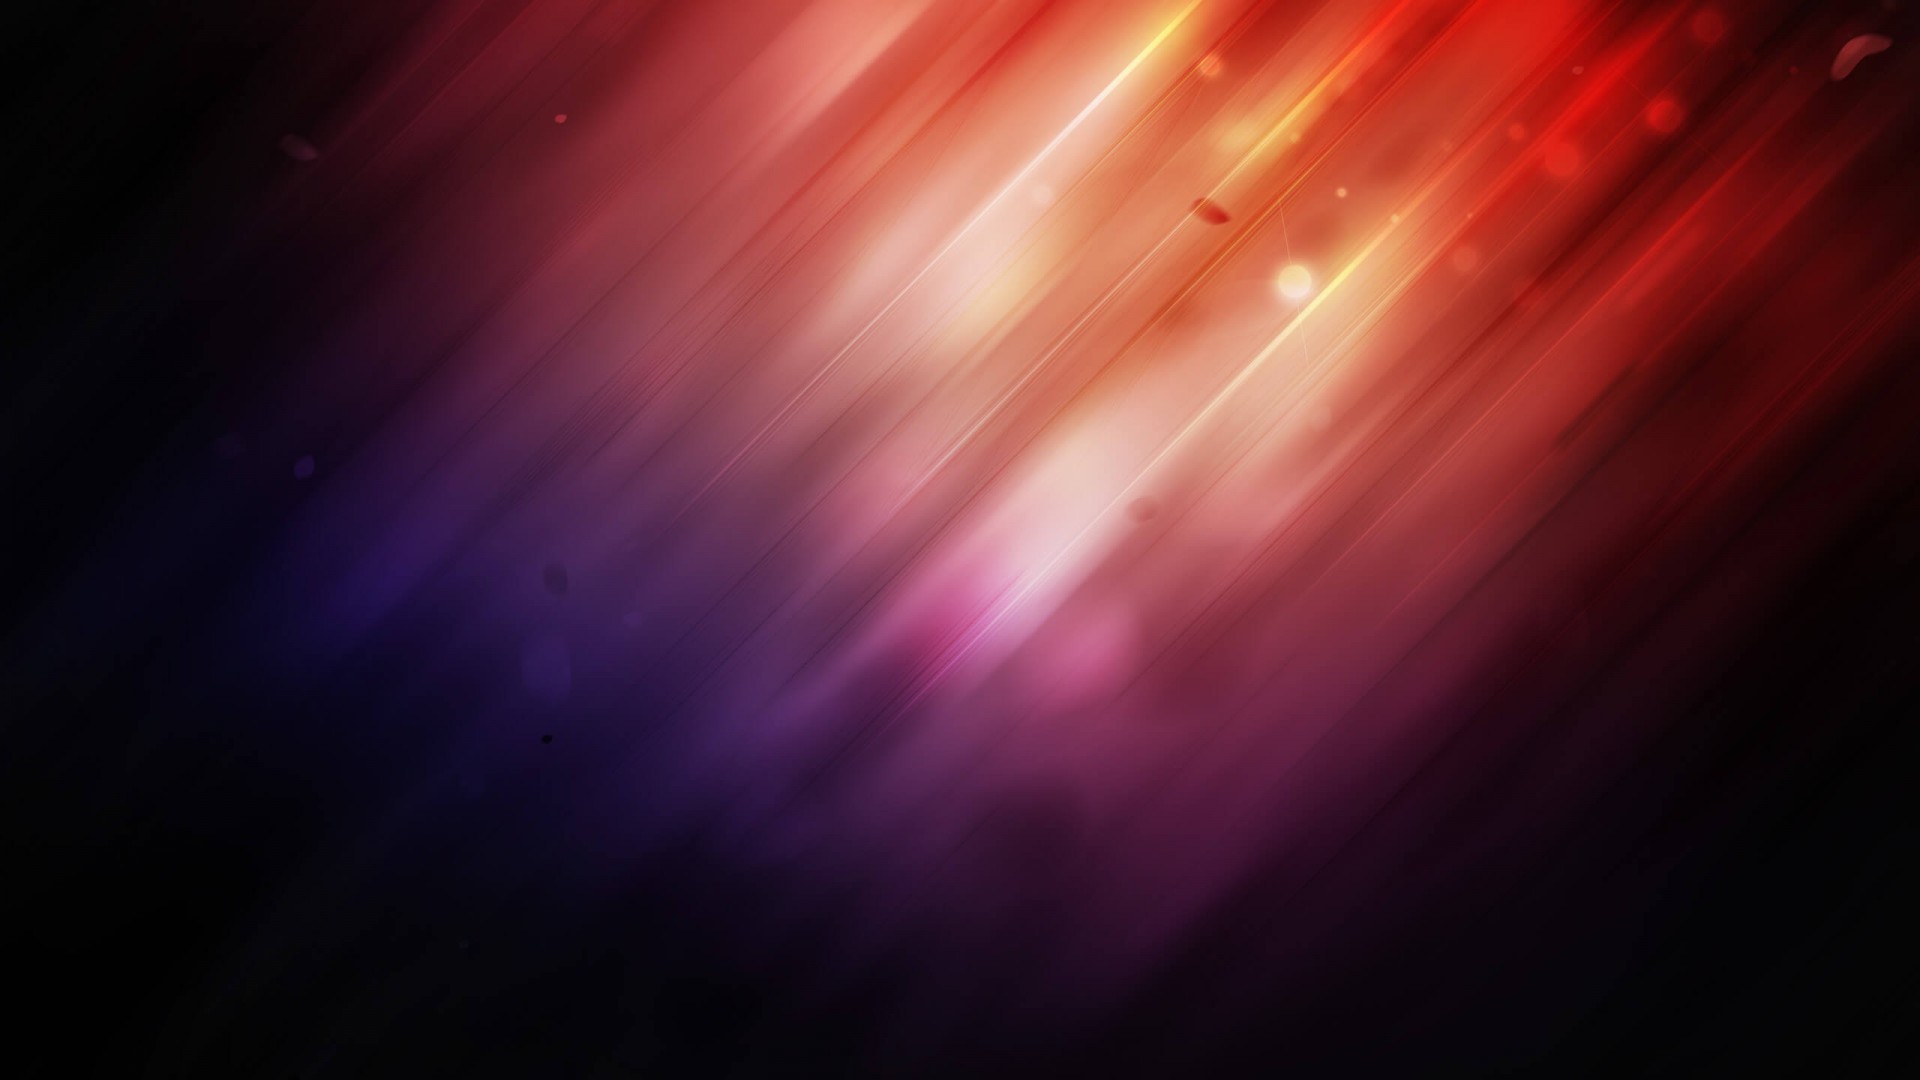 Red Flame Abstract Wallpaper 1920Ã1080